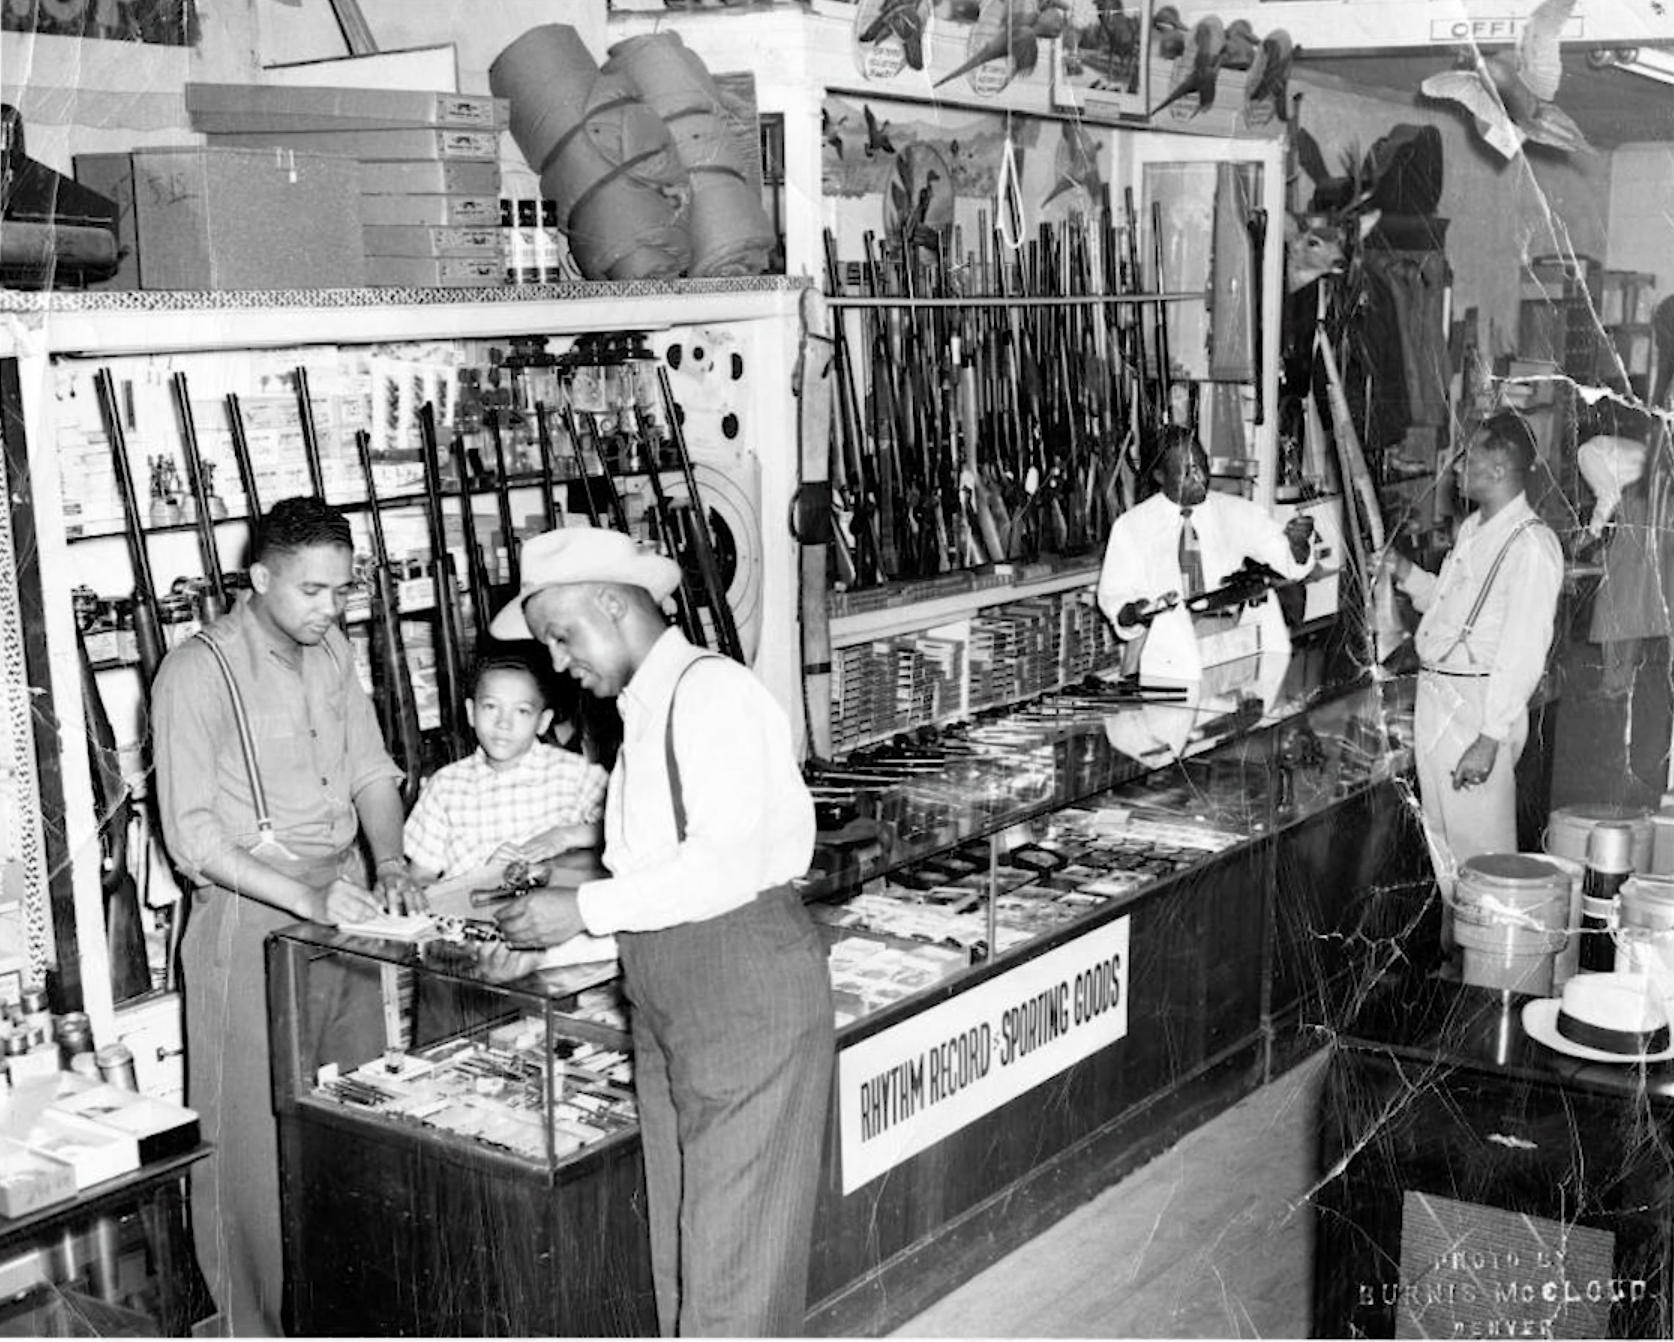 [Image Description: Black and white photograph of a shop in 1940's Denver. Rifles line the walls and Black men are seen standing and discoursing.]